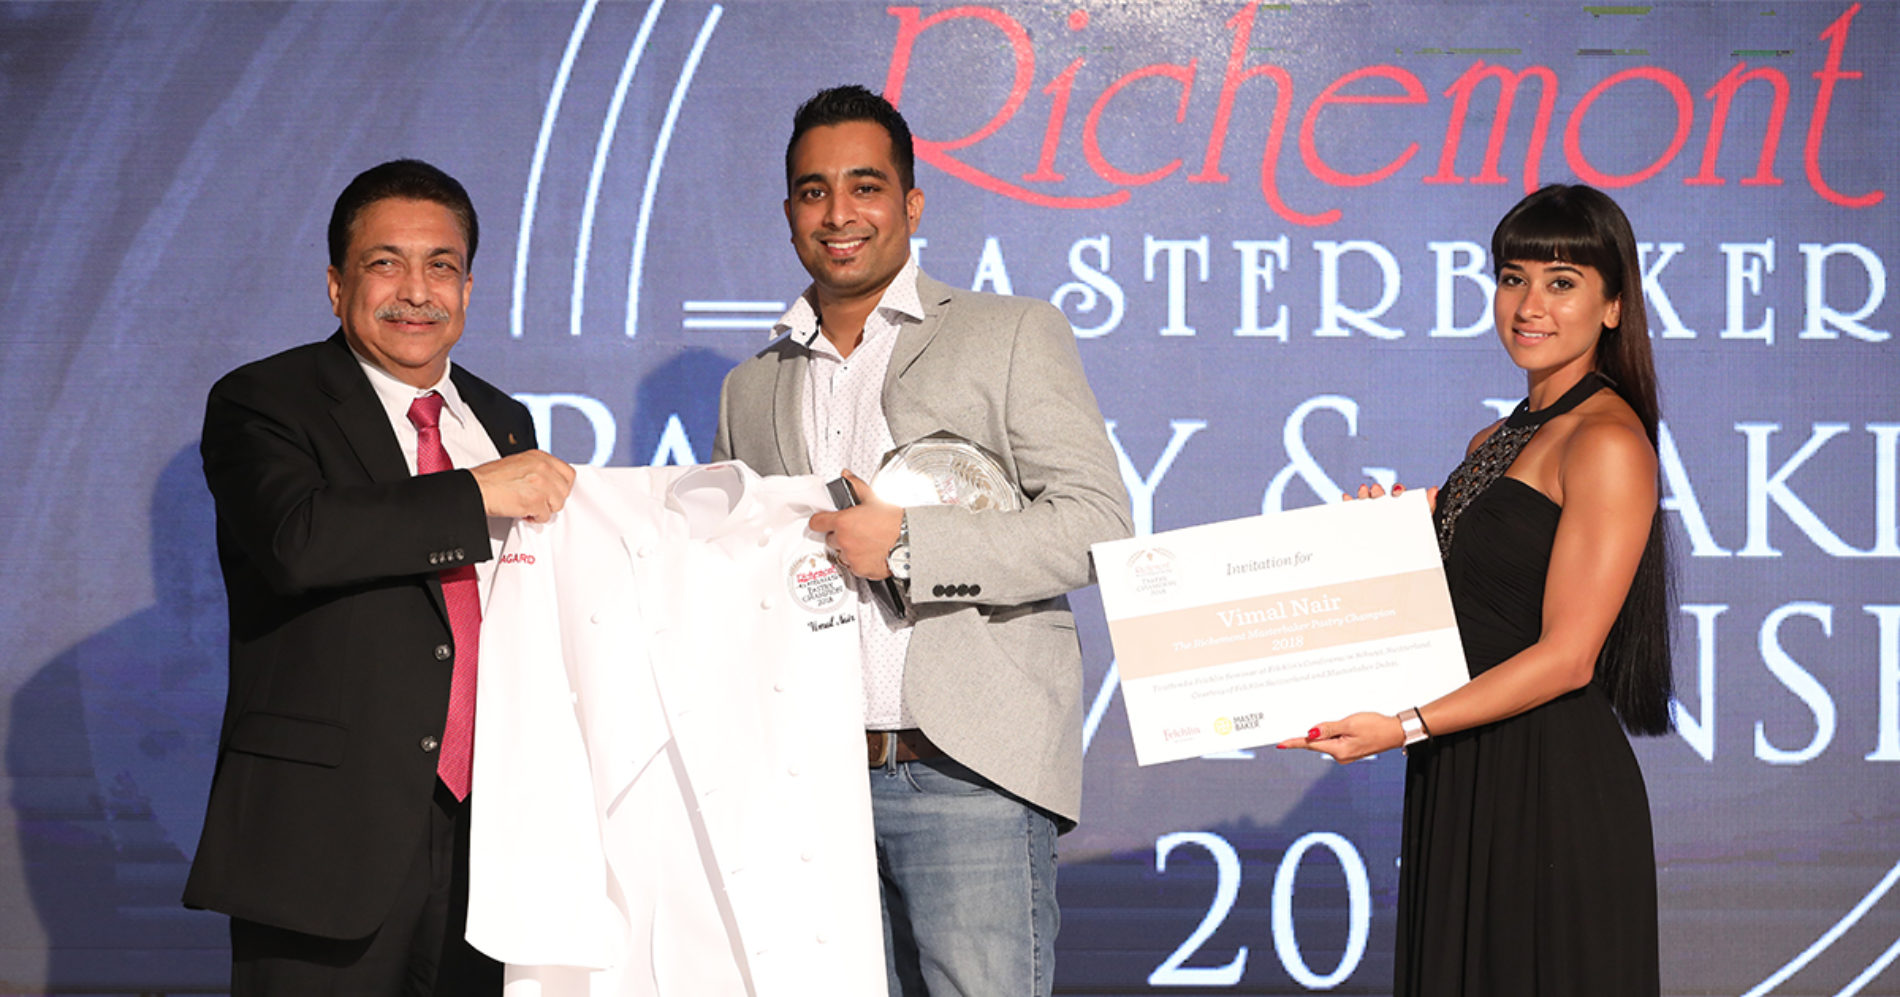 Richemont Masterbaker crowns its inaugural Pastry & Baking Champions